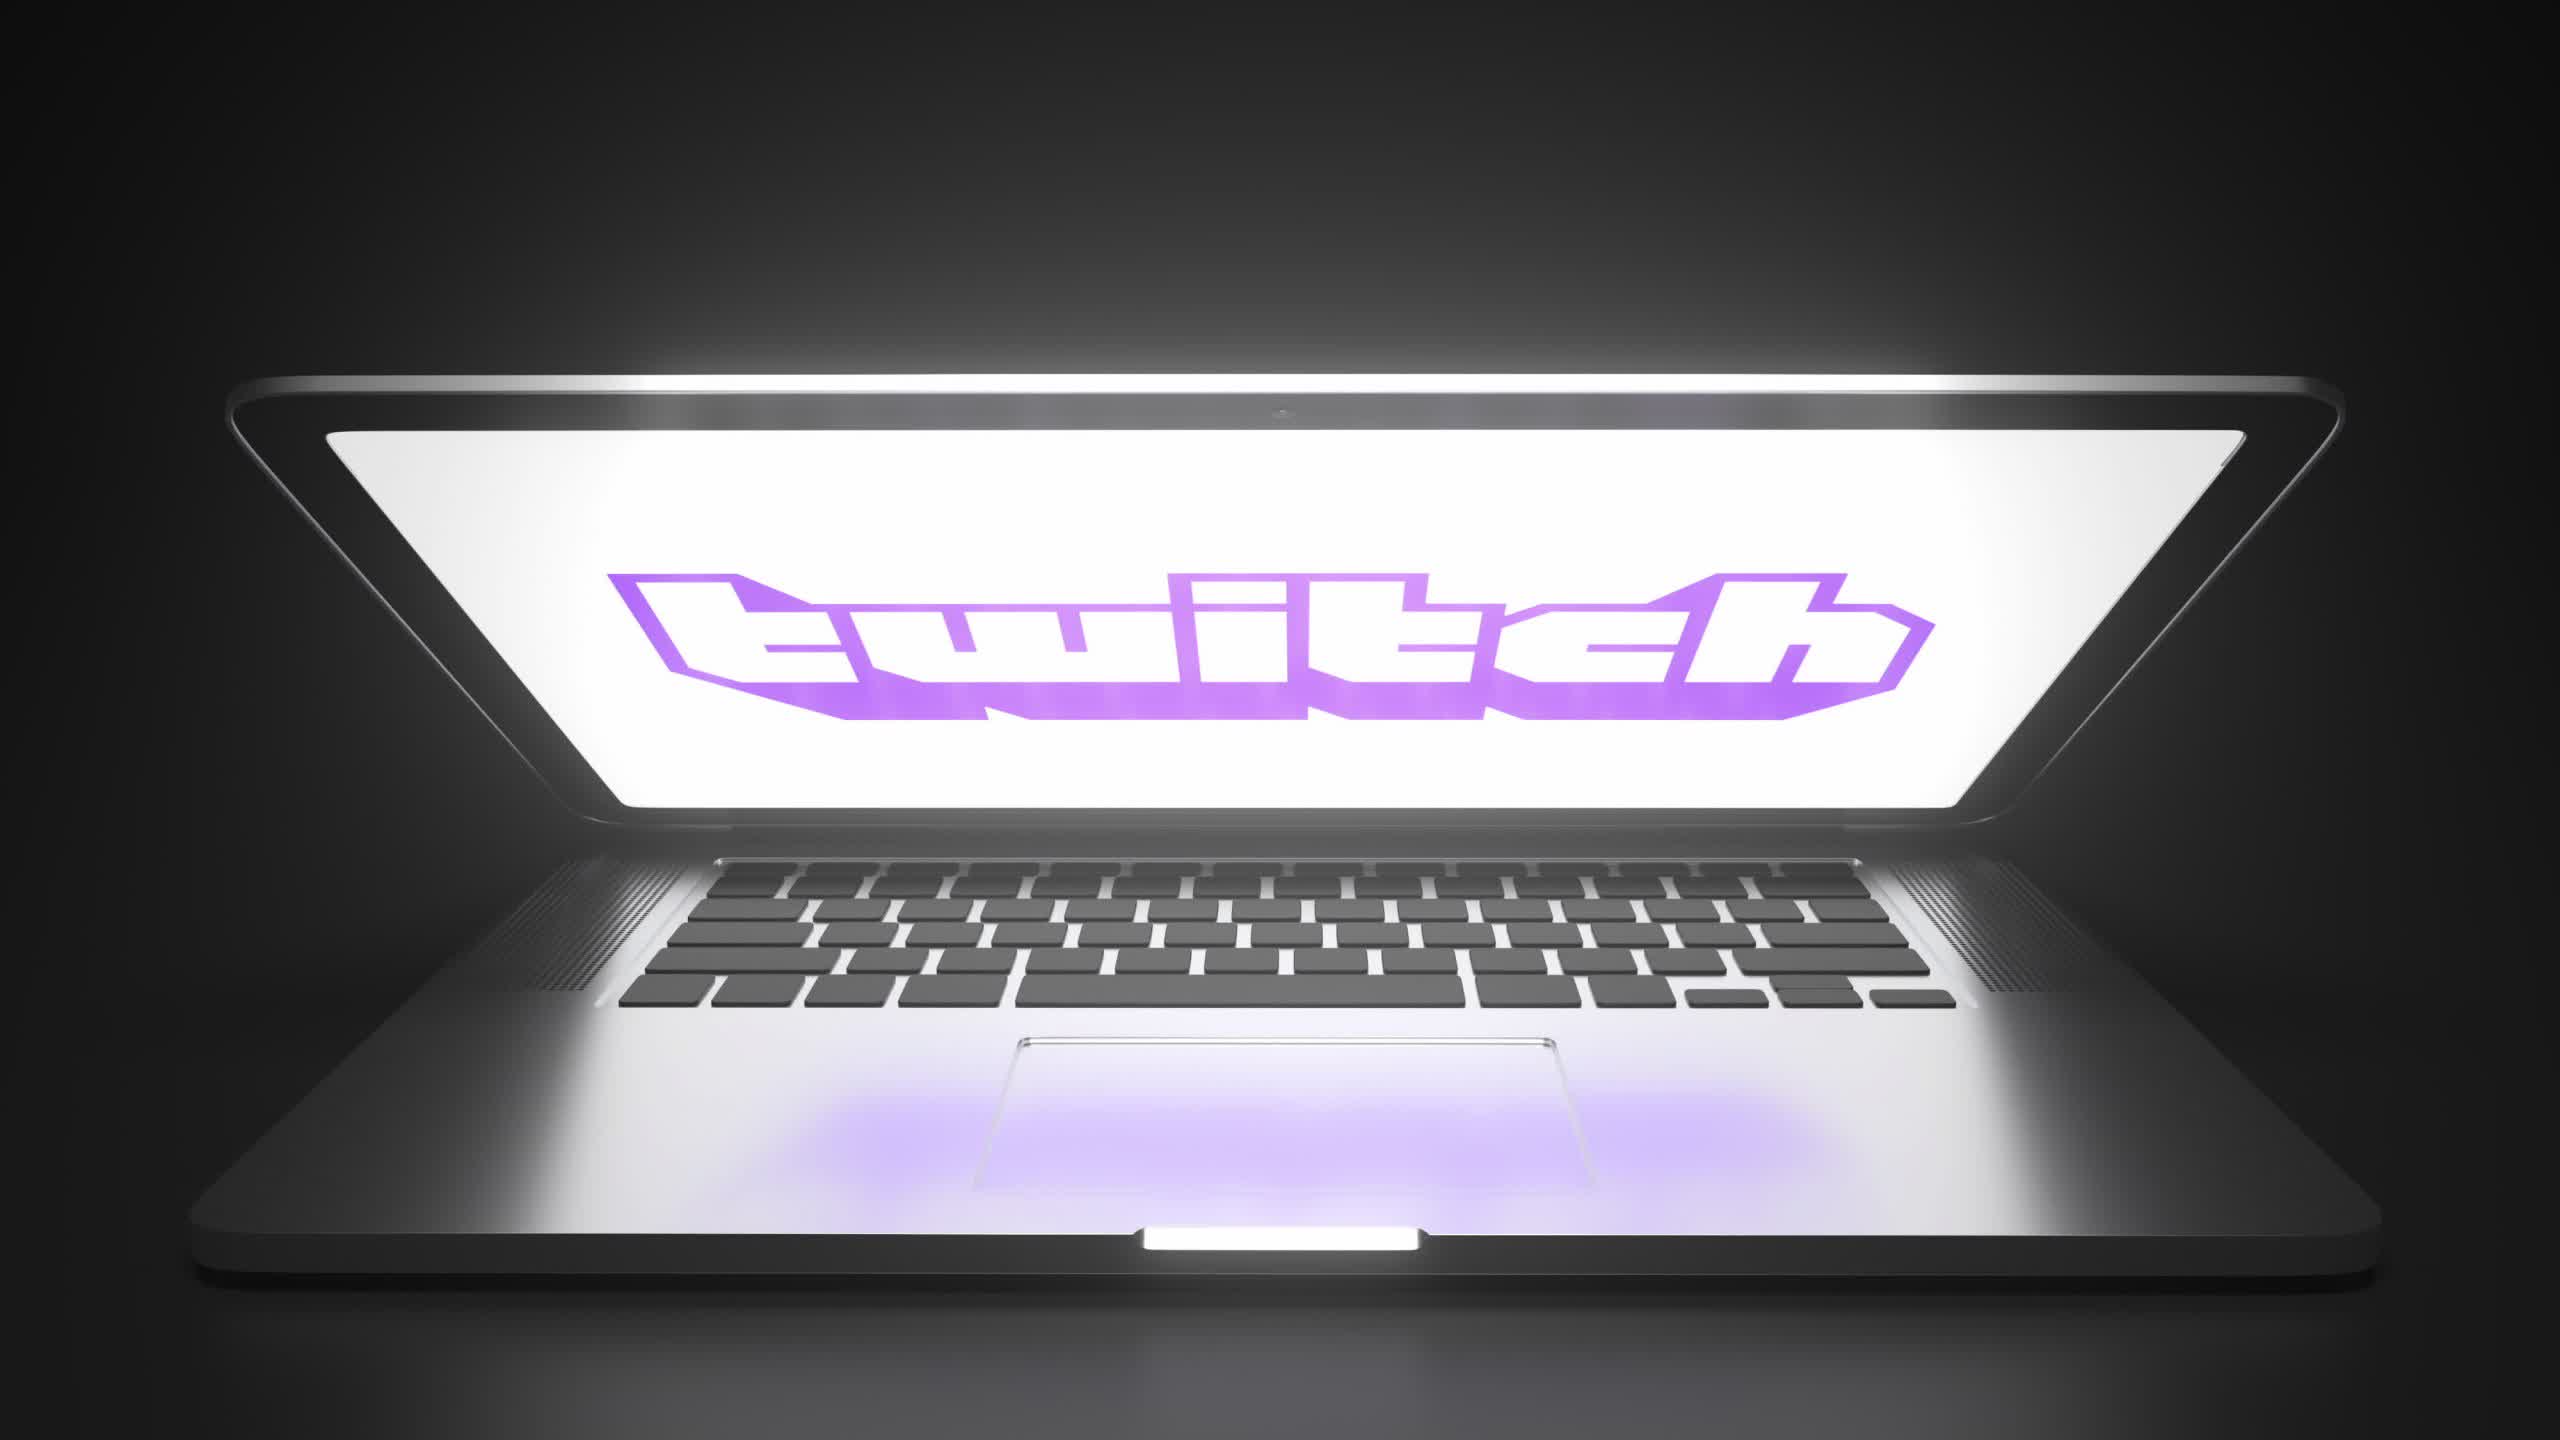 All of Twitch has just leaked, including its source code and user payouts